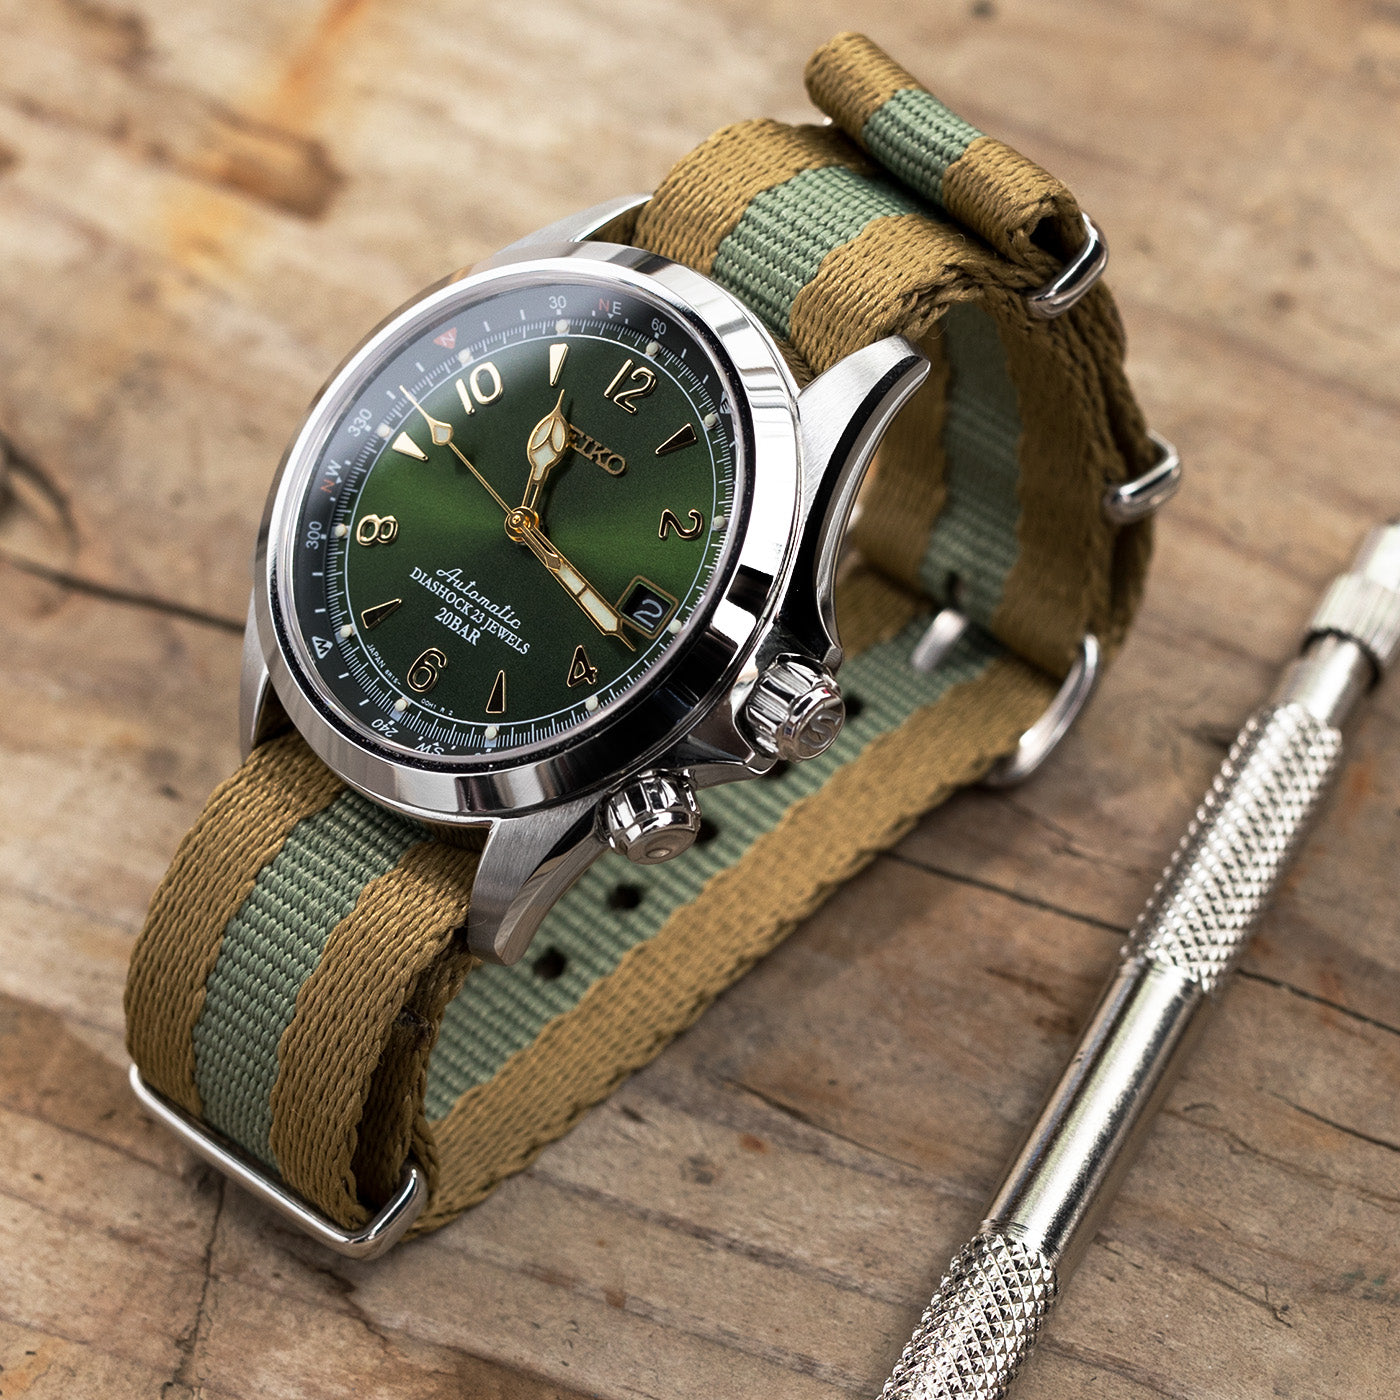 Seiko Alpinist SARB017 Green NATO strap by Strapcode watch bands